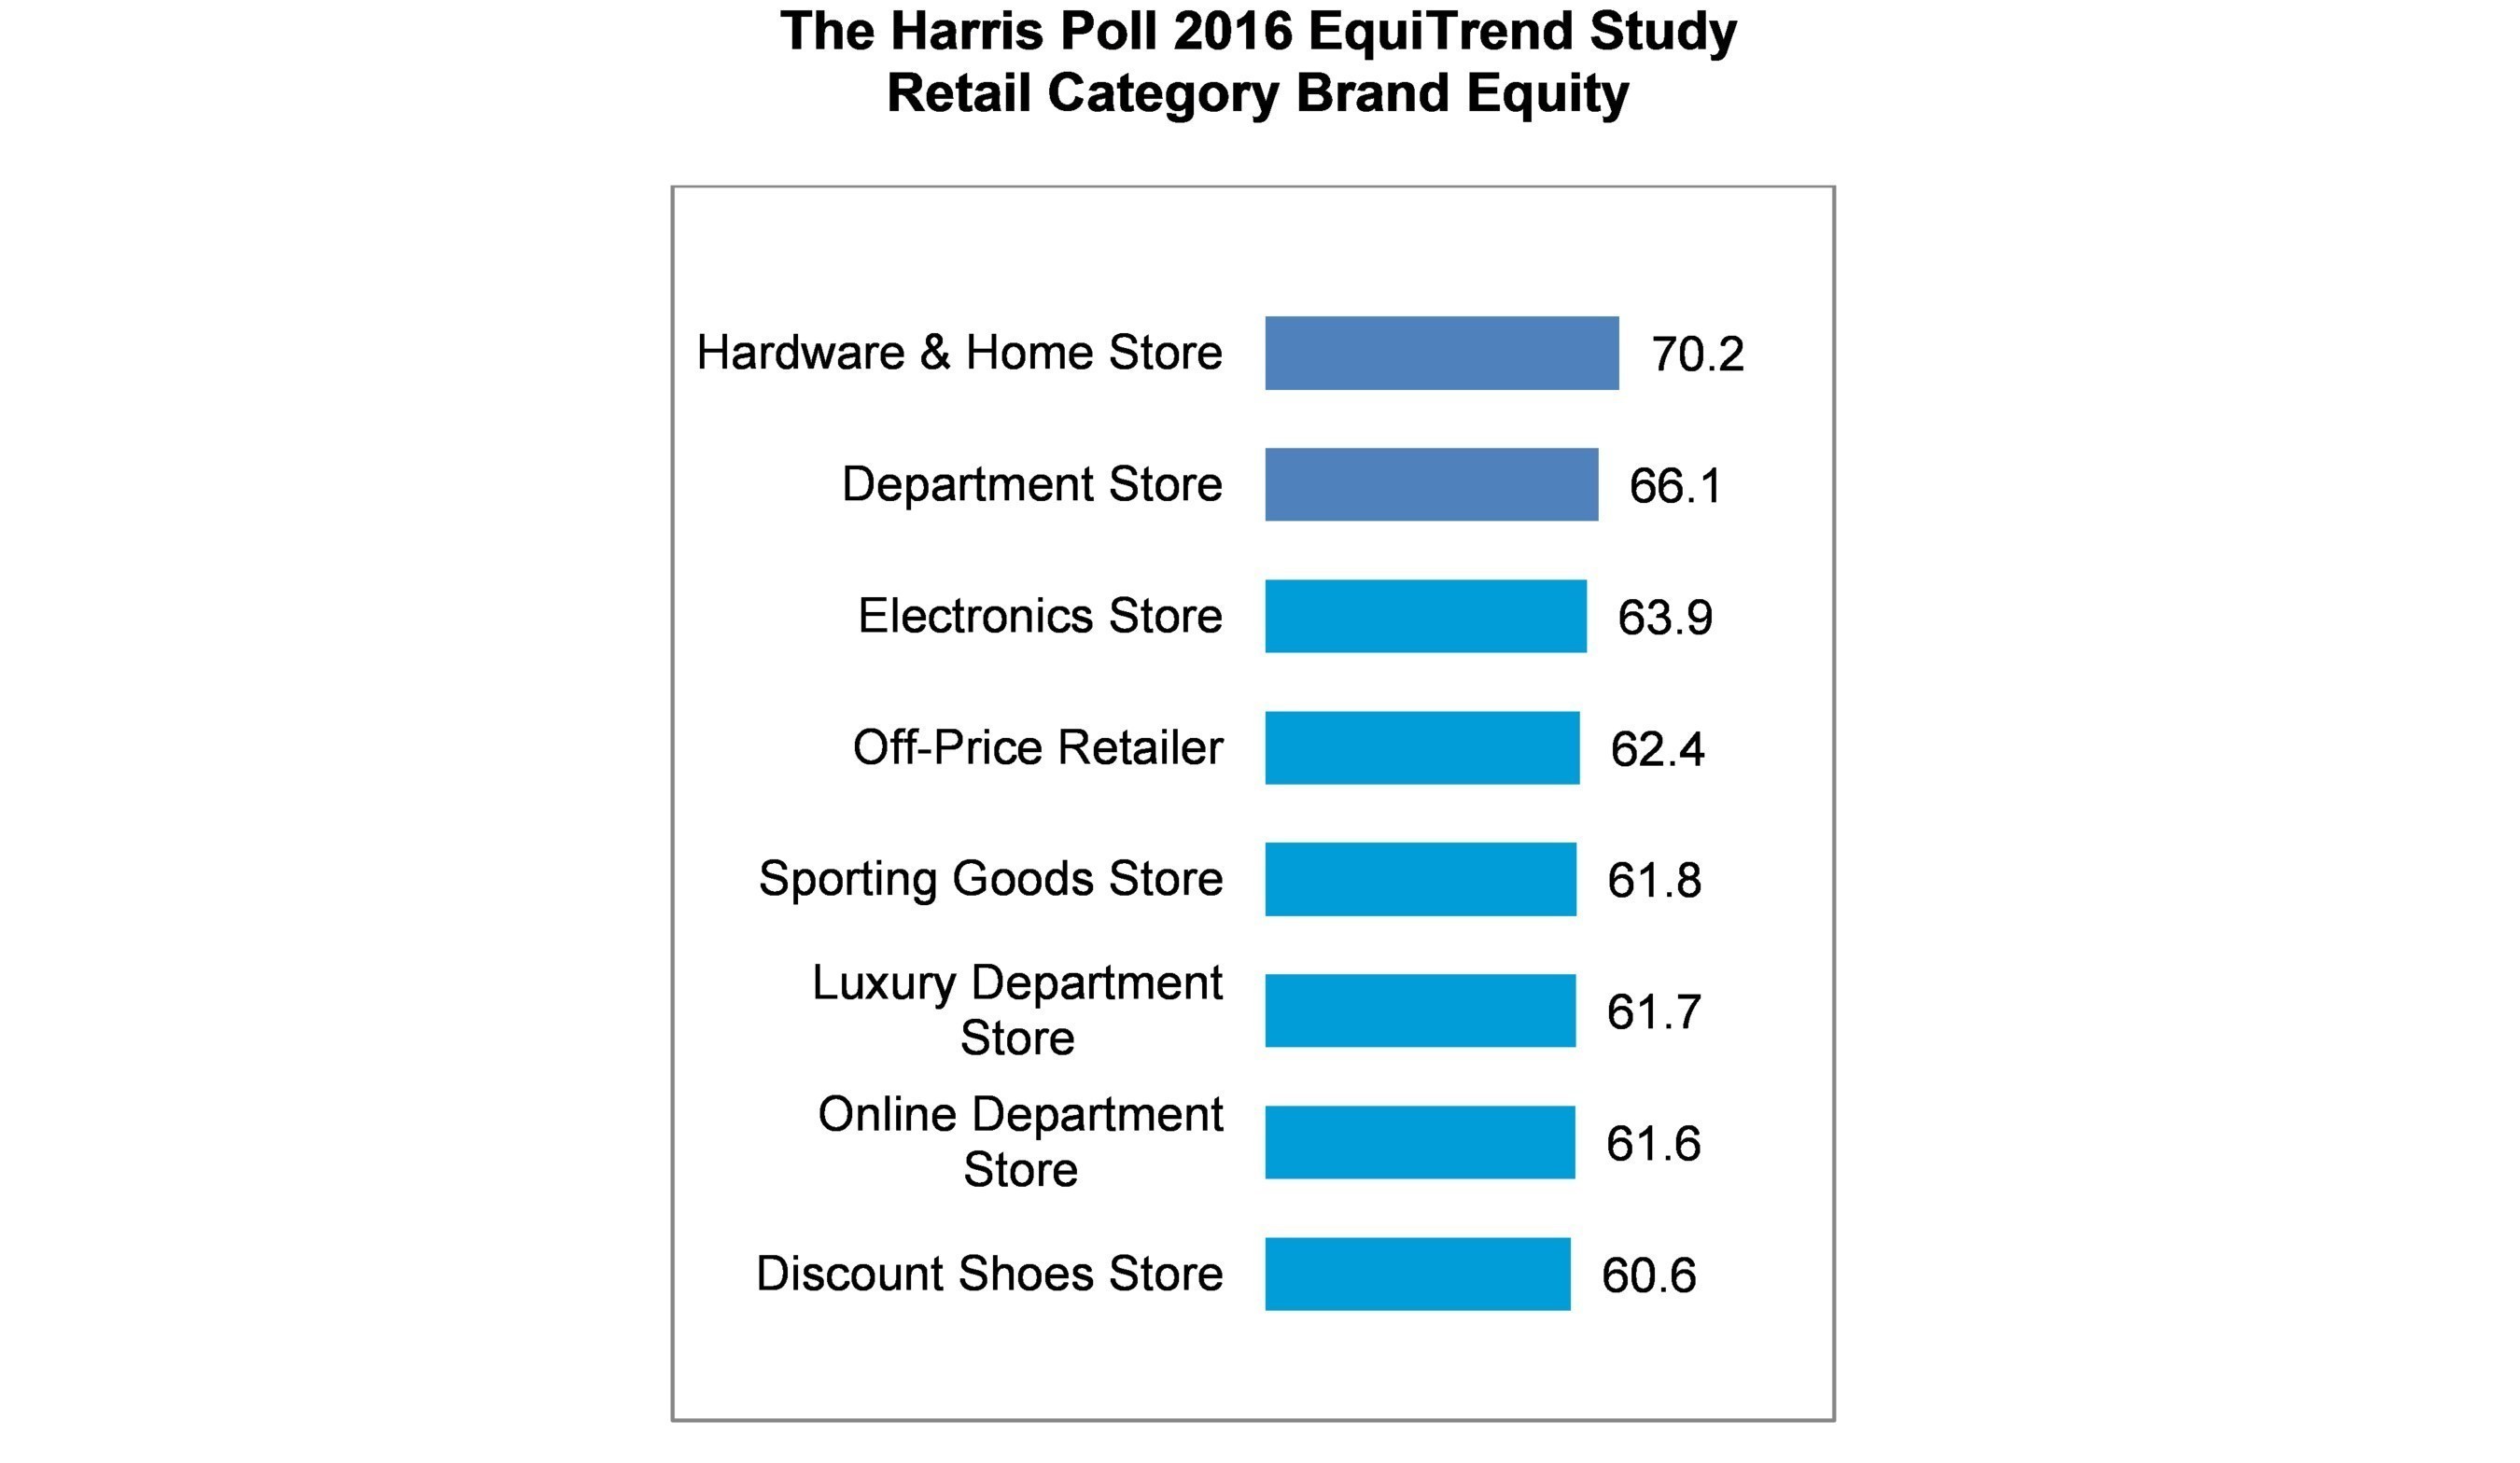 Retail category brand equity